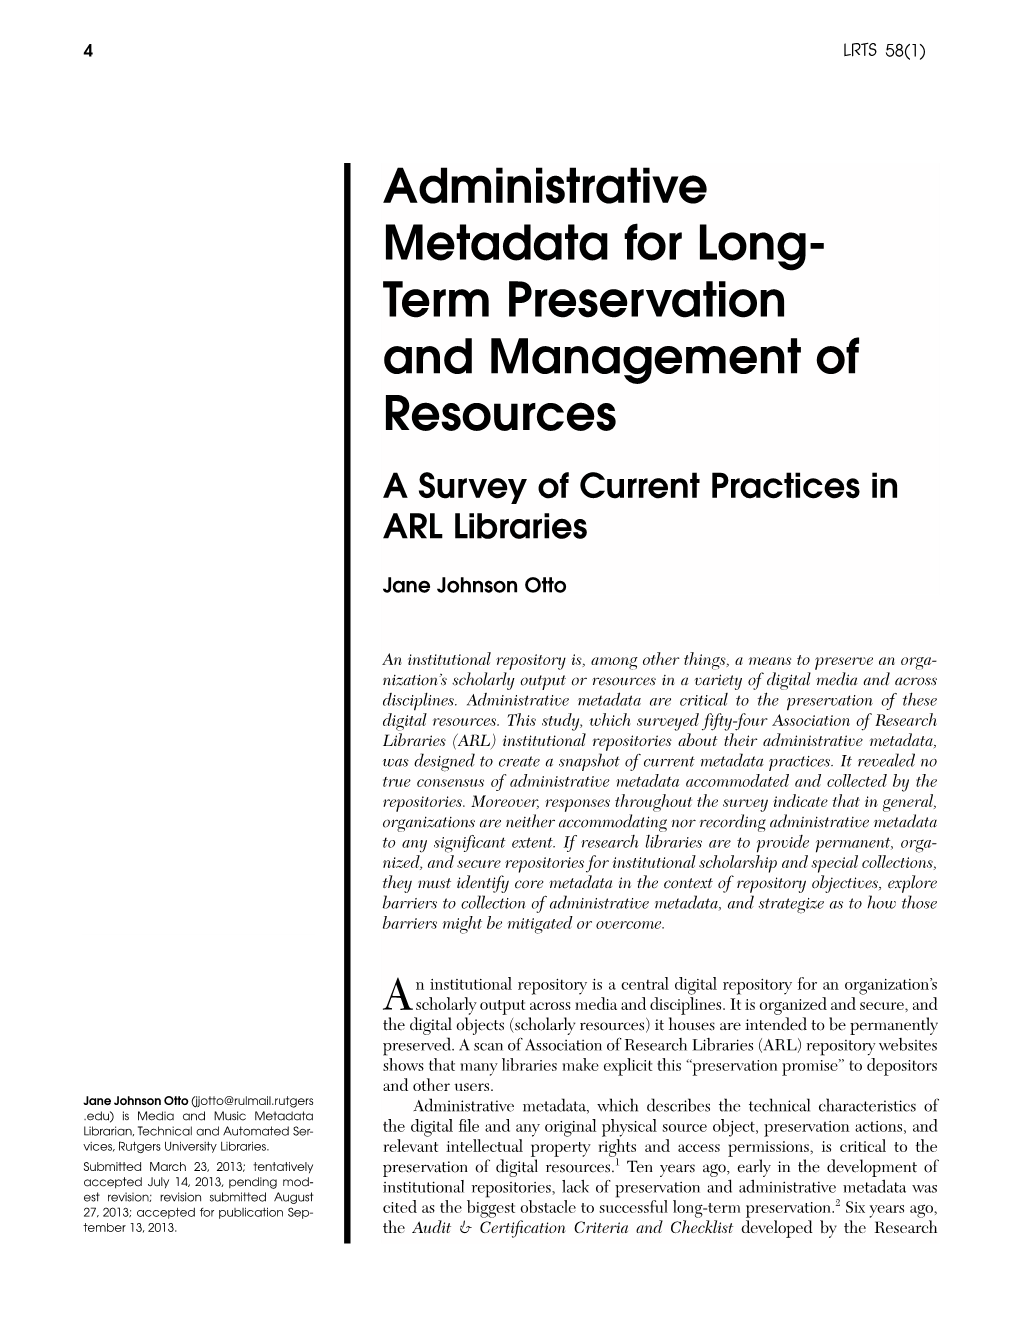 Administrative Metadata for Long- Term Preservation and Management of Resources a Survey of Current Practices in ARL Libraries